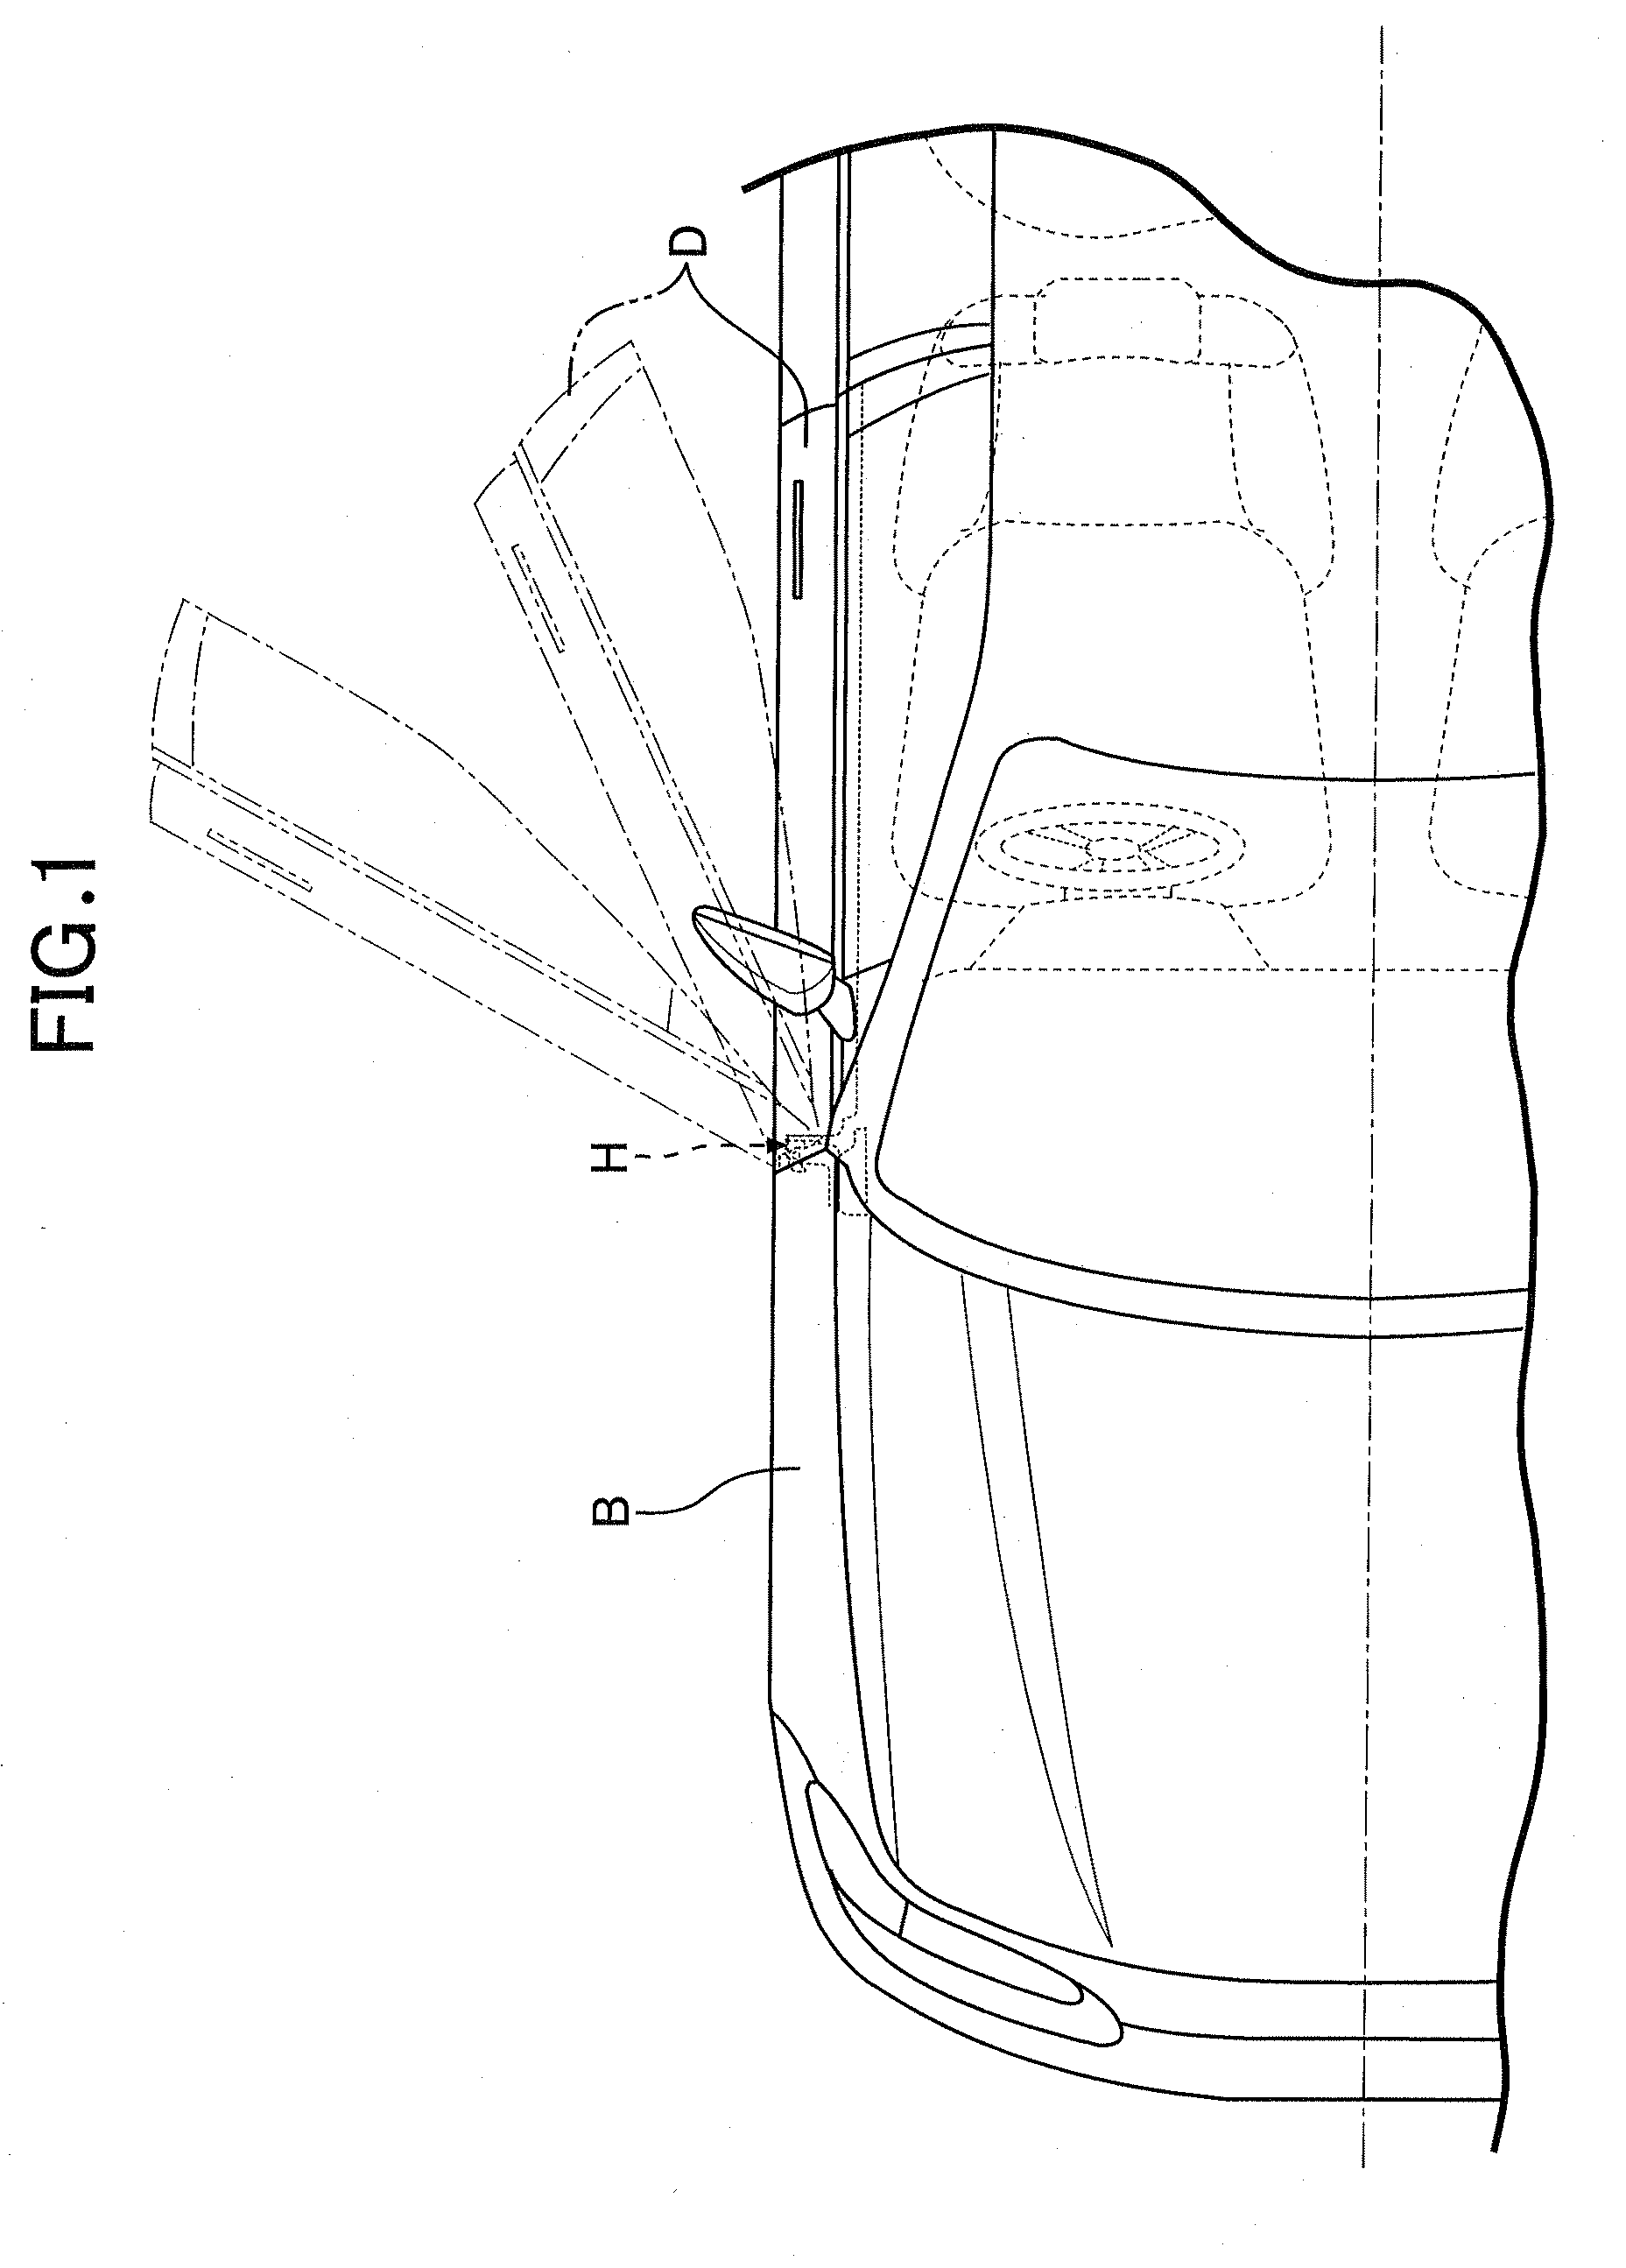 Checker-equipped door hinge device for vehicle